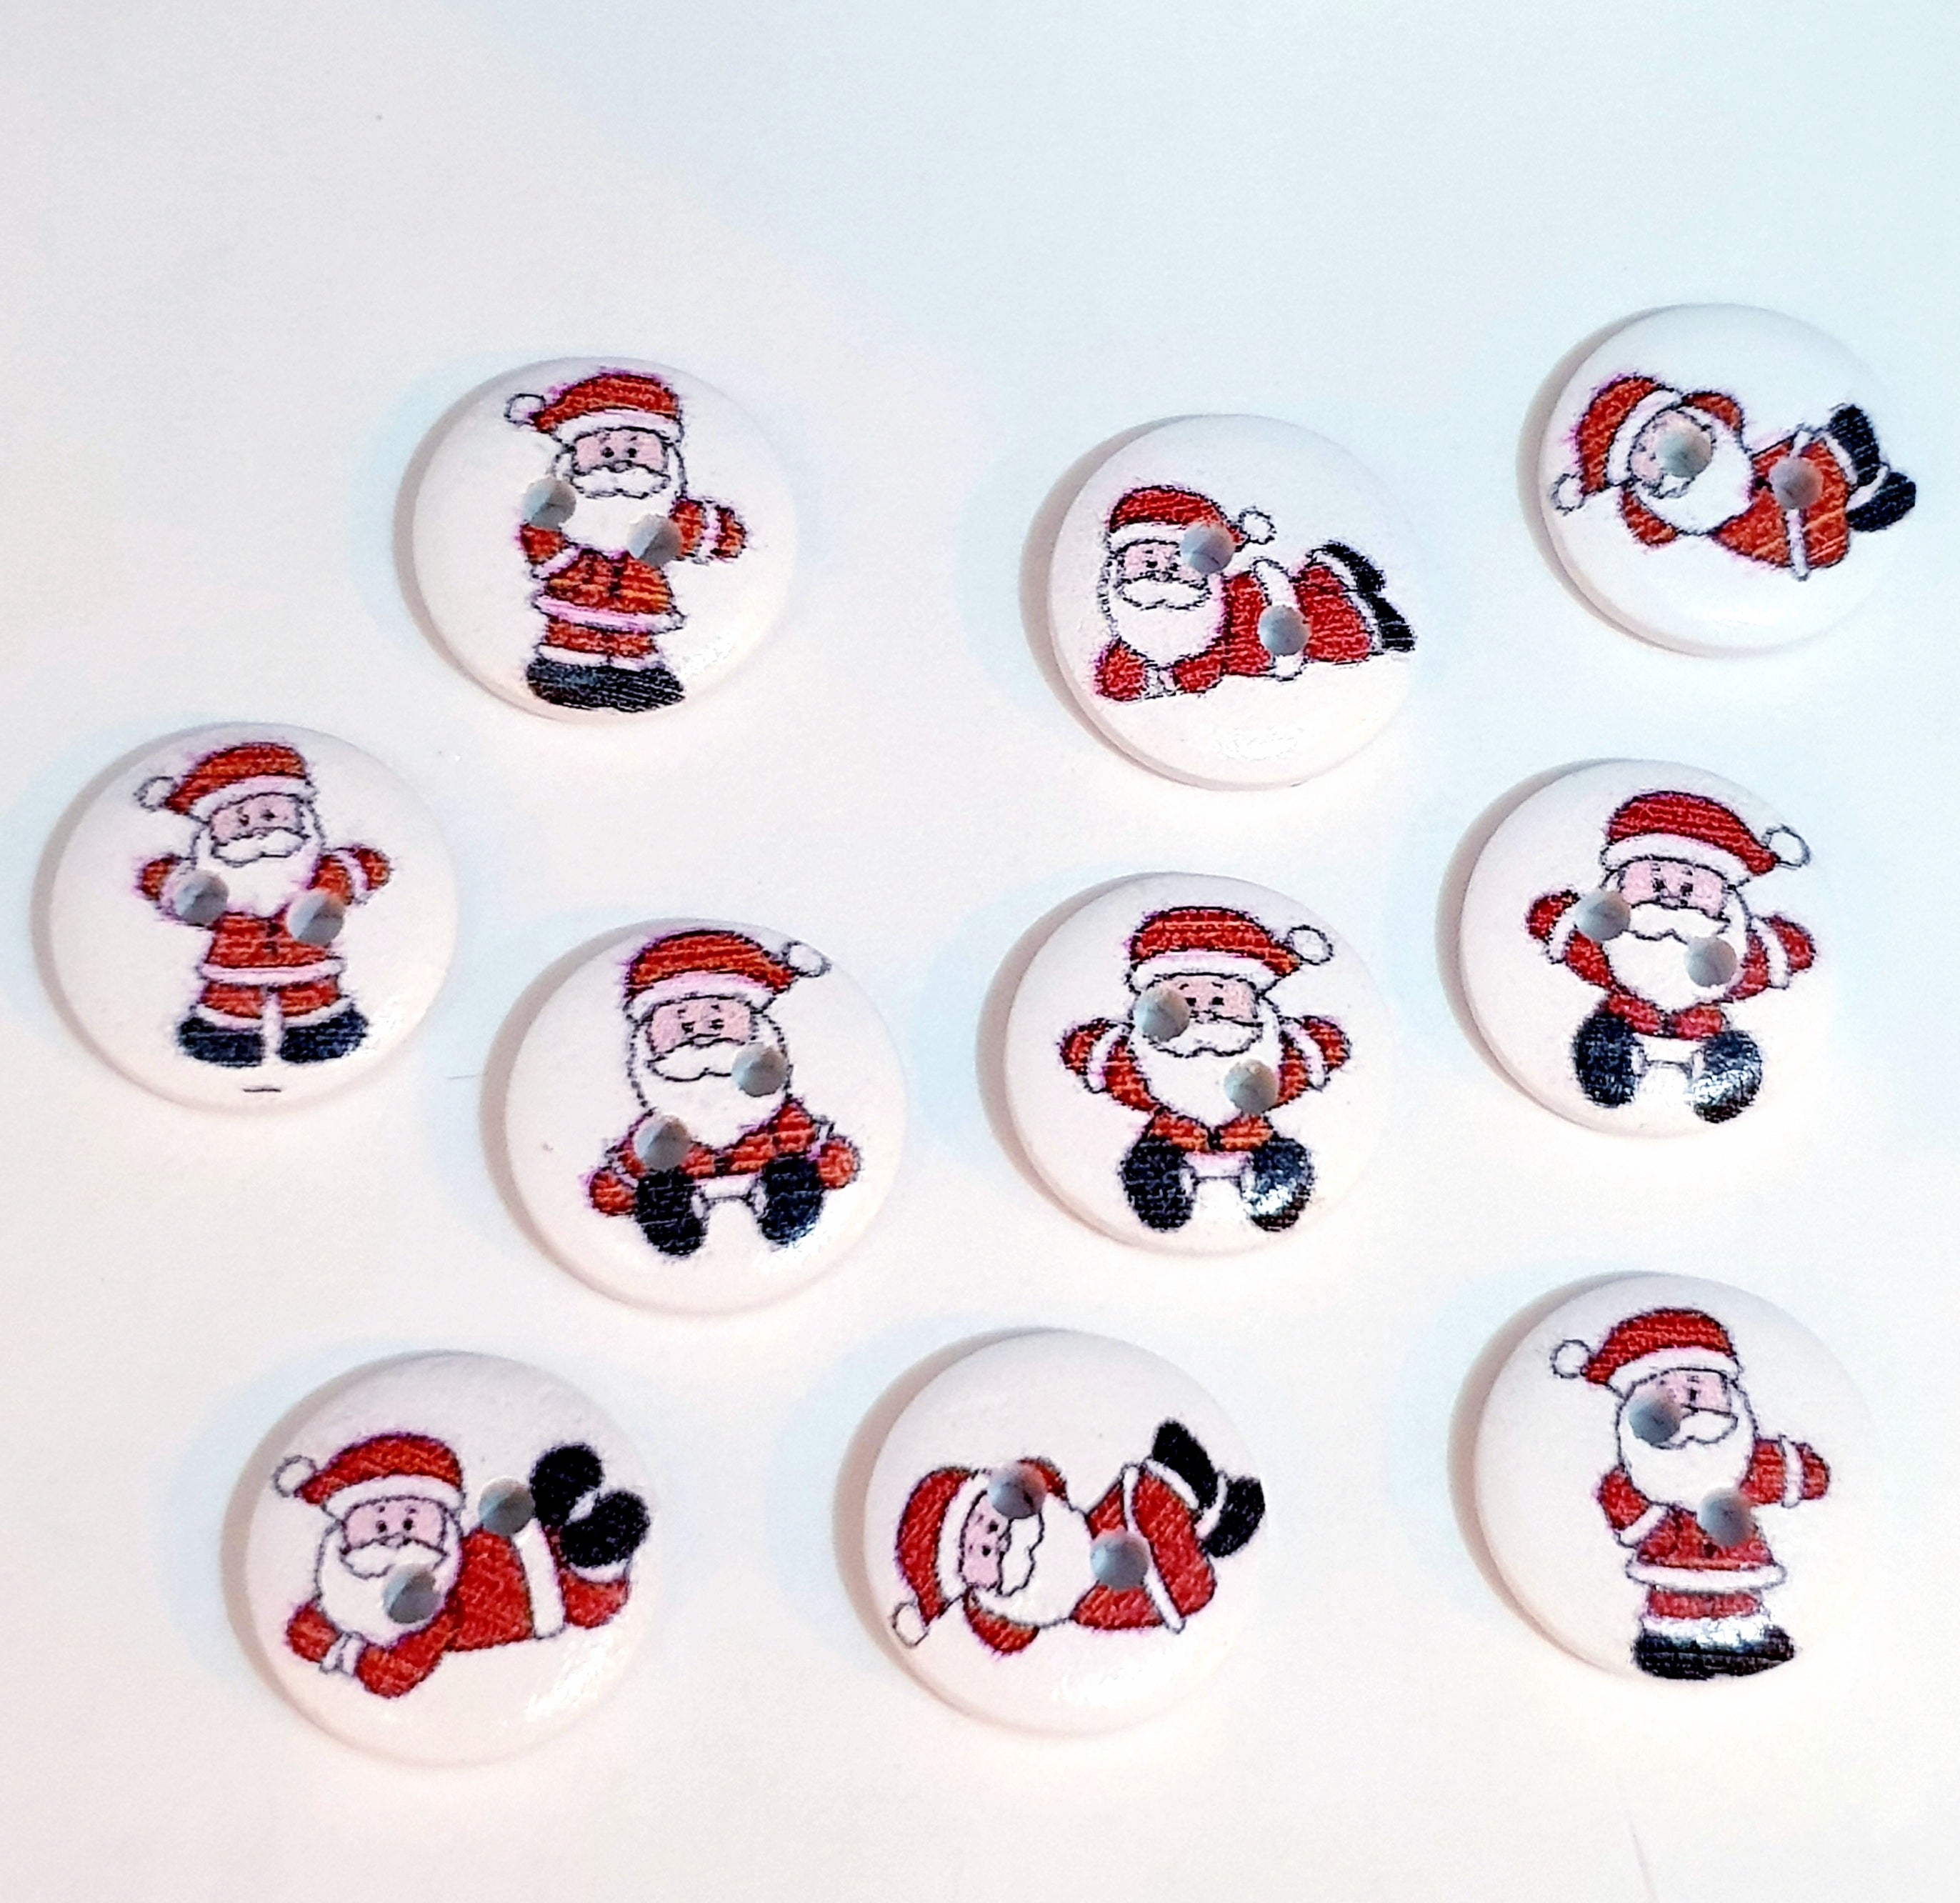 MajorCrafts 48pcs 15mm White and Red Mixed Style Christmas Santa Claus Pattern 2 Holes Round Wooden Sewing Buttons